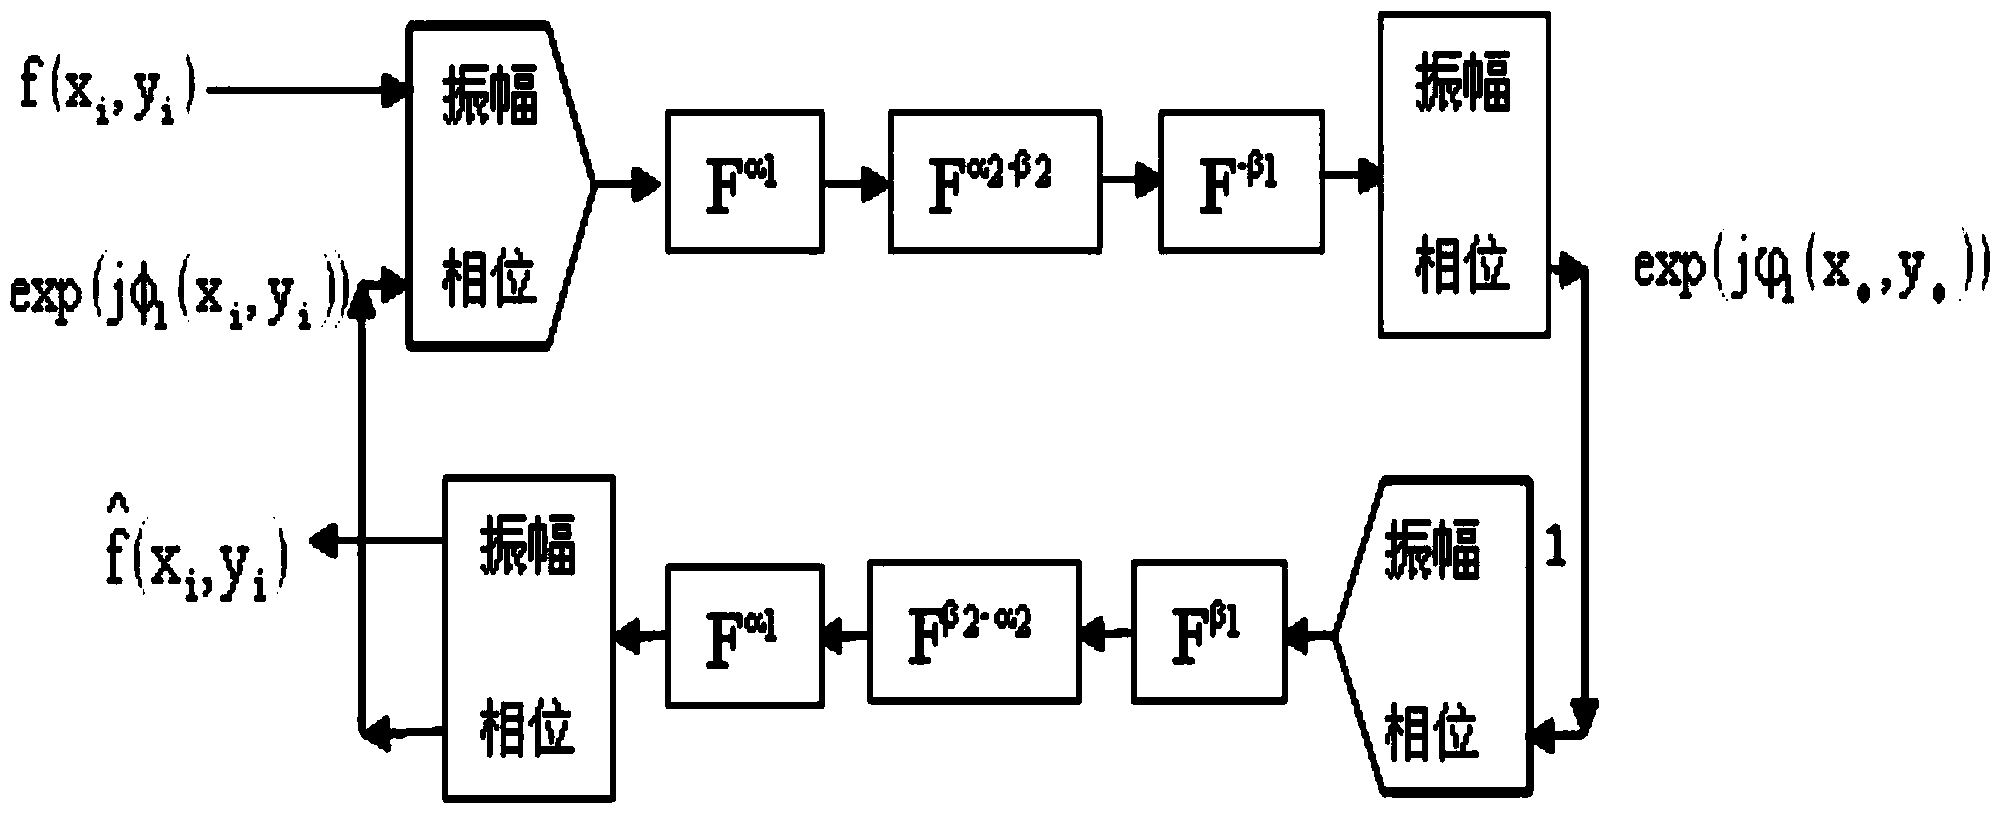 Single-channel color image encryption method based on chaos and phase retrieval process